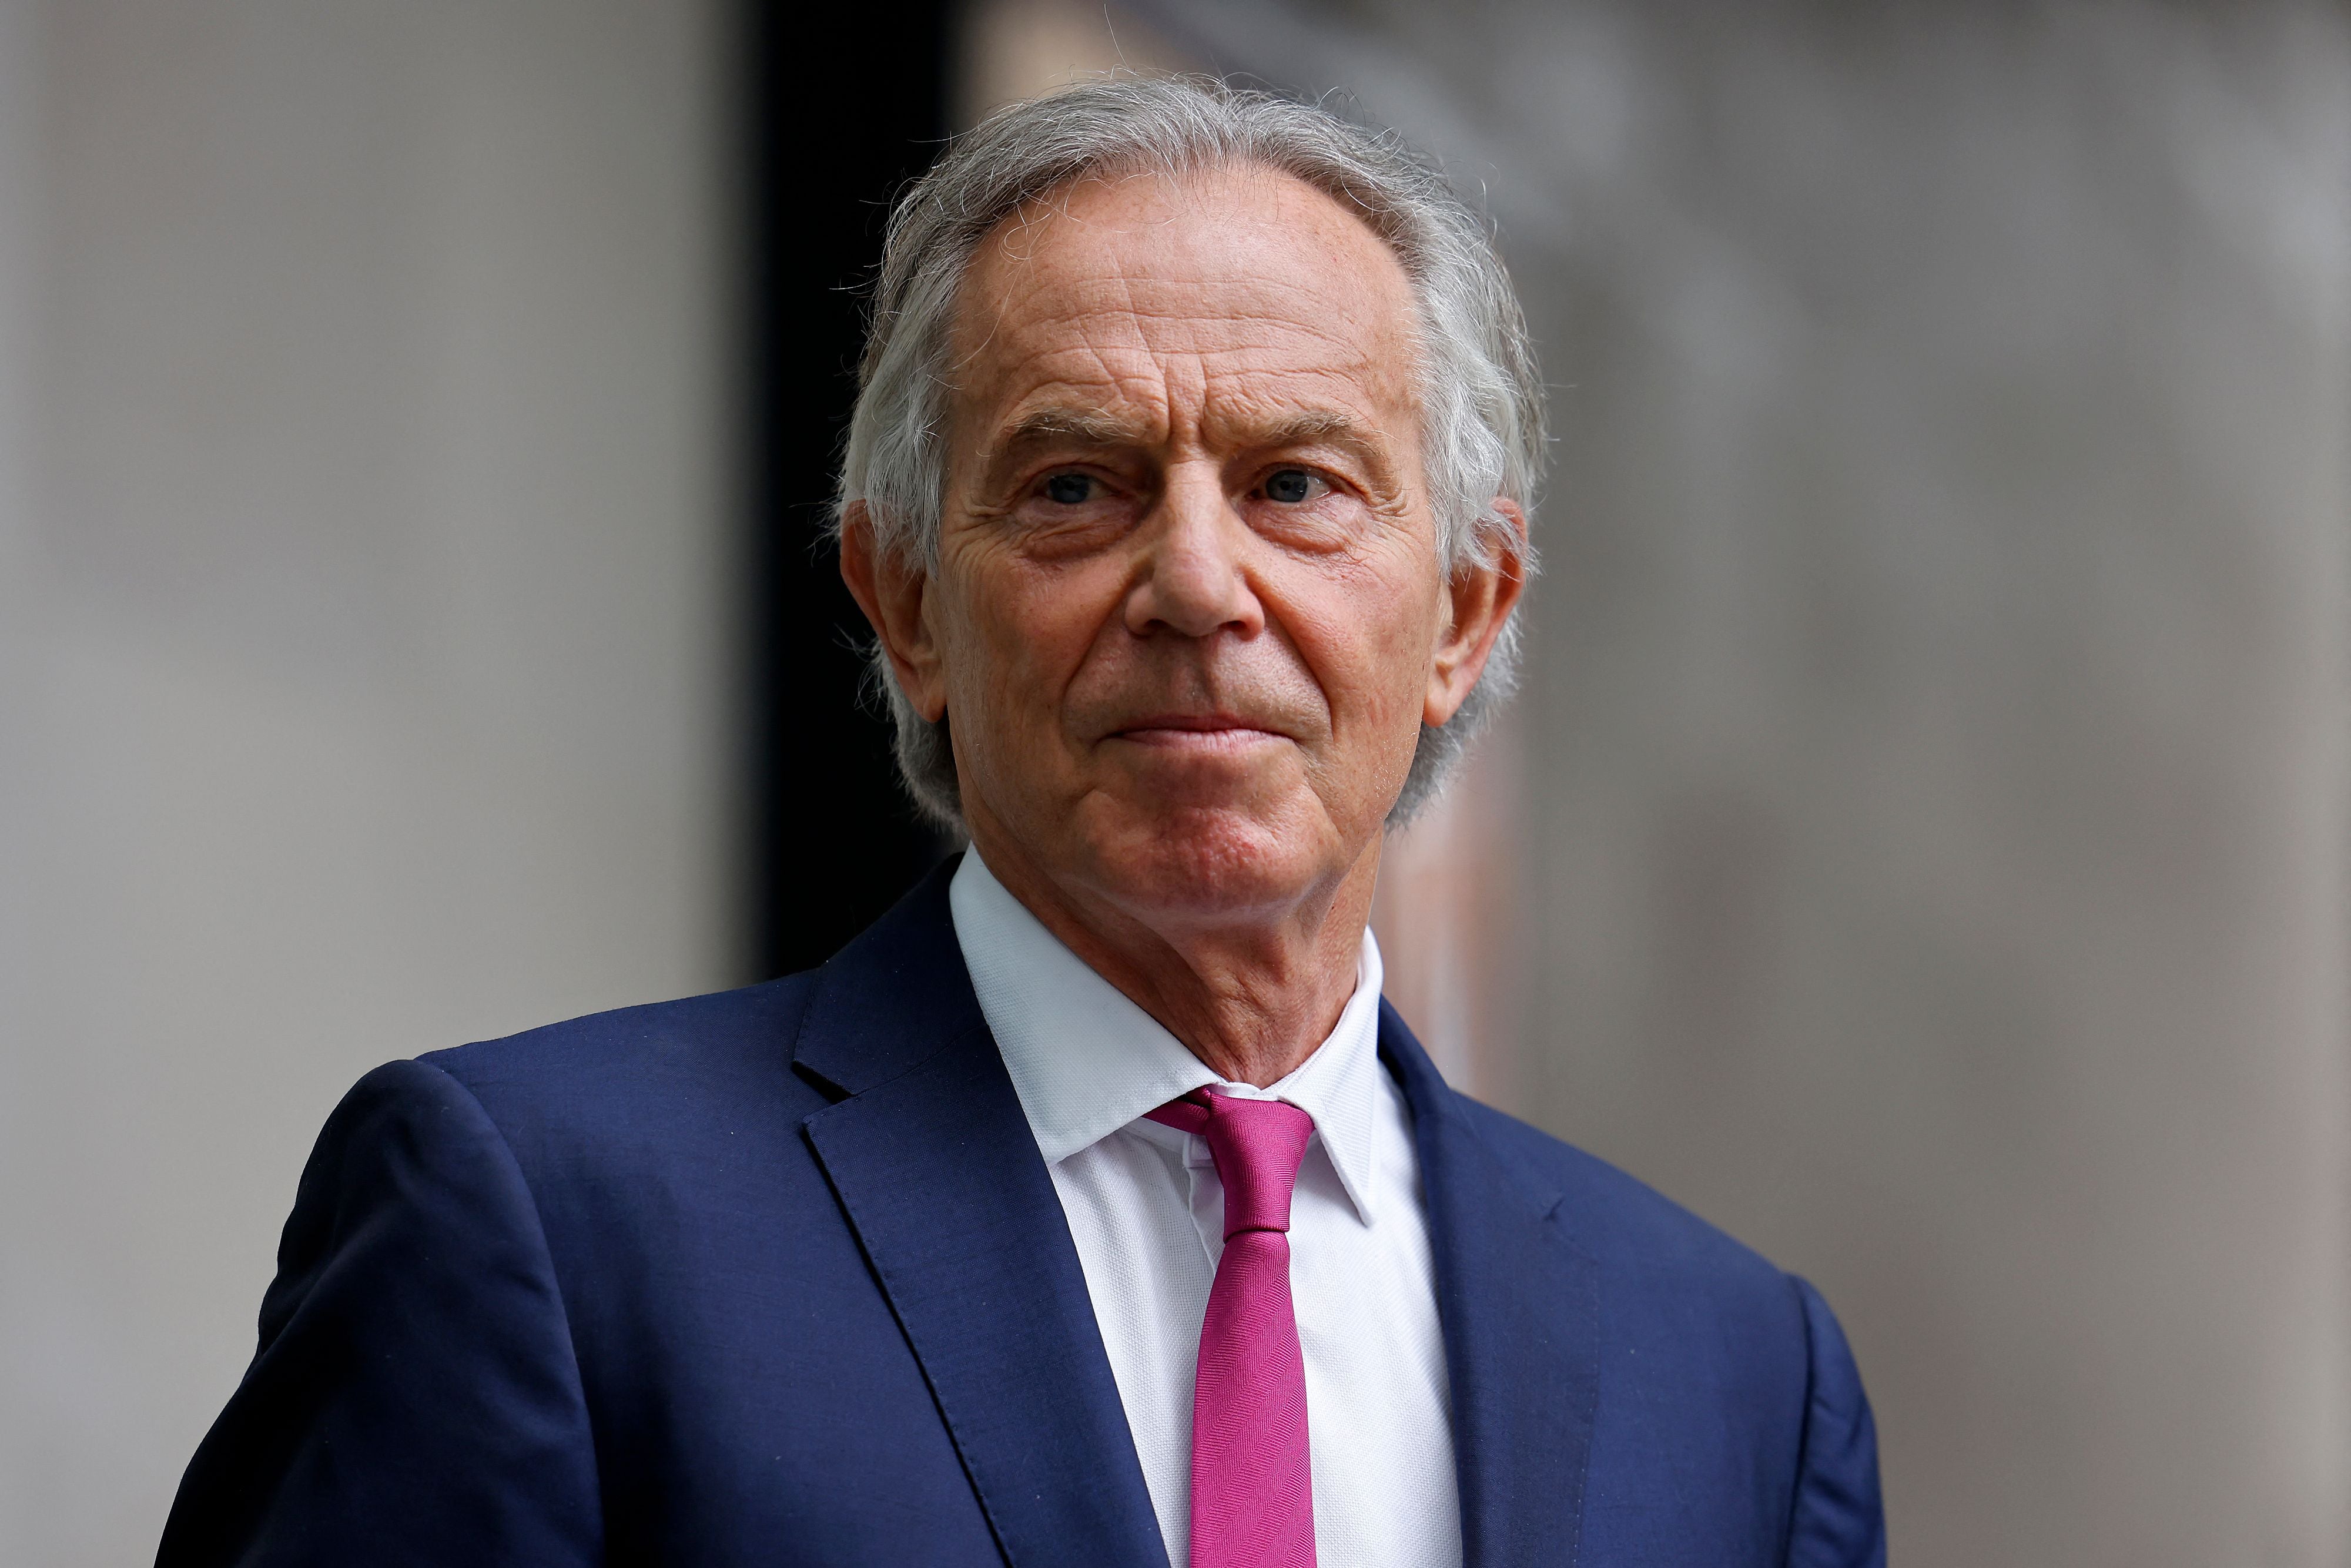 Former British Prime Minister Tony Blair, wearing a face covering due to Covid-19, leaves the BBC in central London on June 6, 2021, after appearing on the BBC political programme The Andrew Marr Show